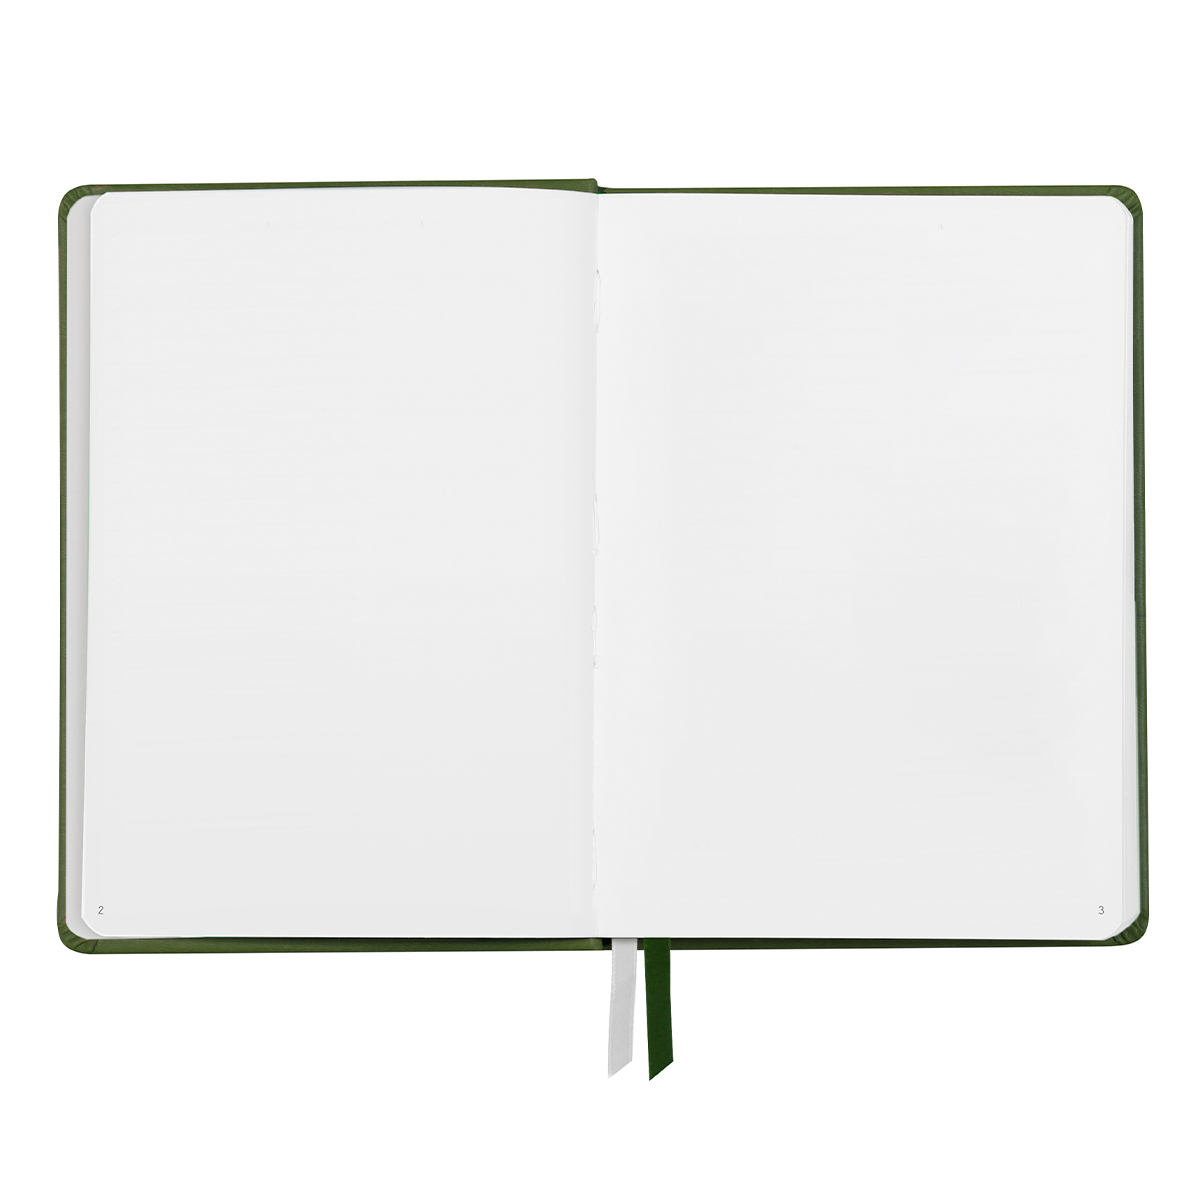 Rhodia Goalbook A5 Softcover - Black (Dotted)